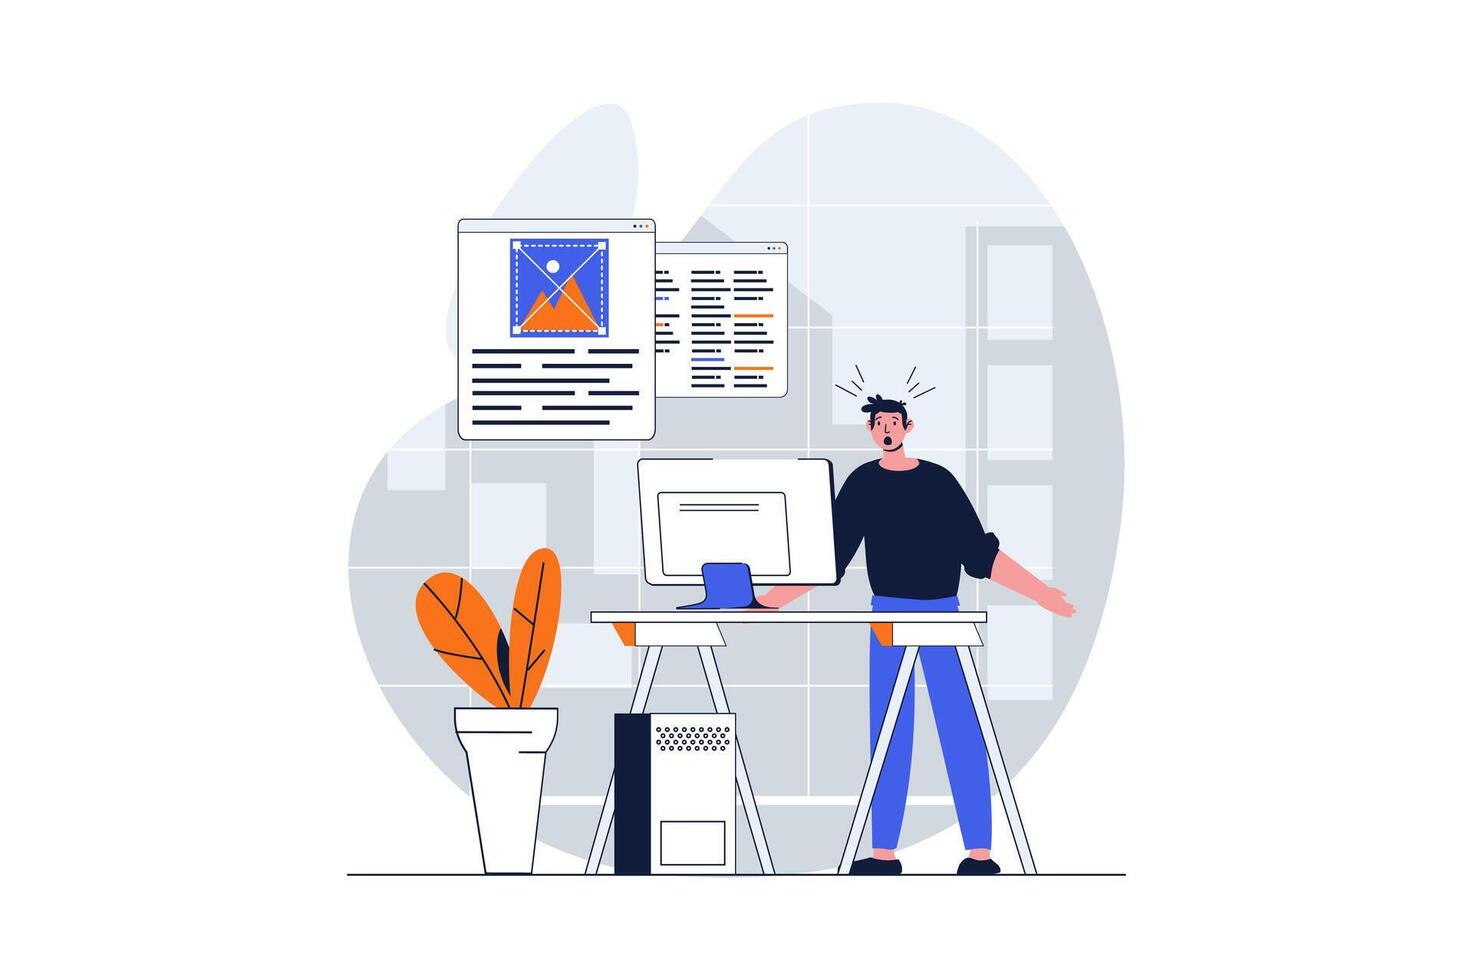 Web design concept with character scene. Man creating layouts and working with code, making optimization. People situation in flat design. Vector illustration for social media marketing material.